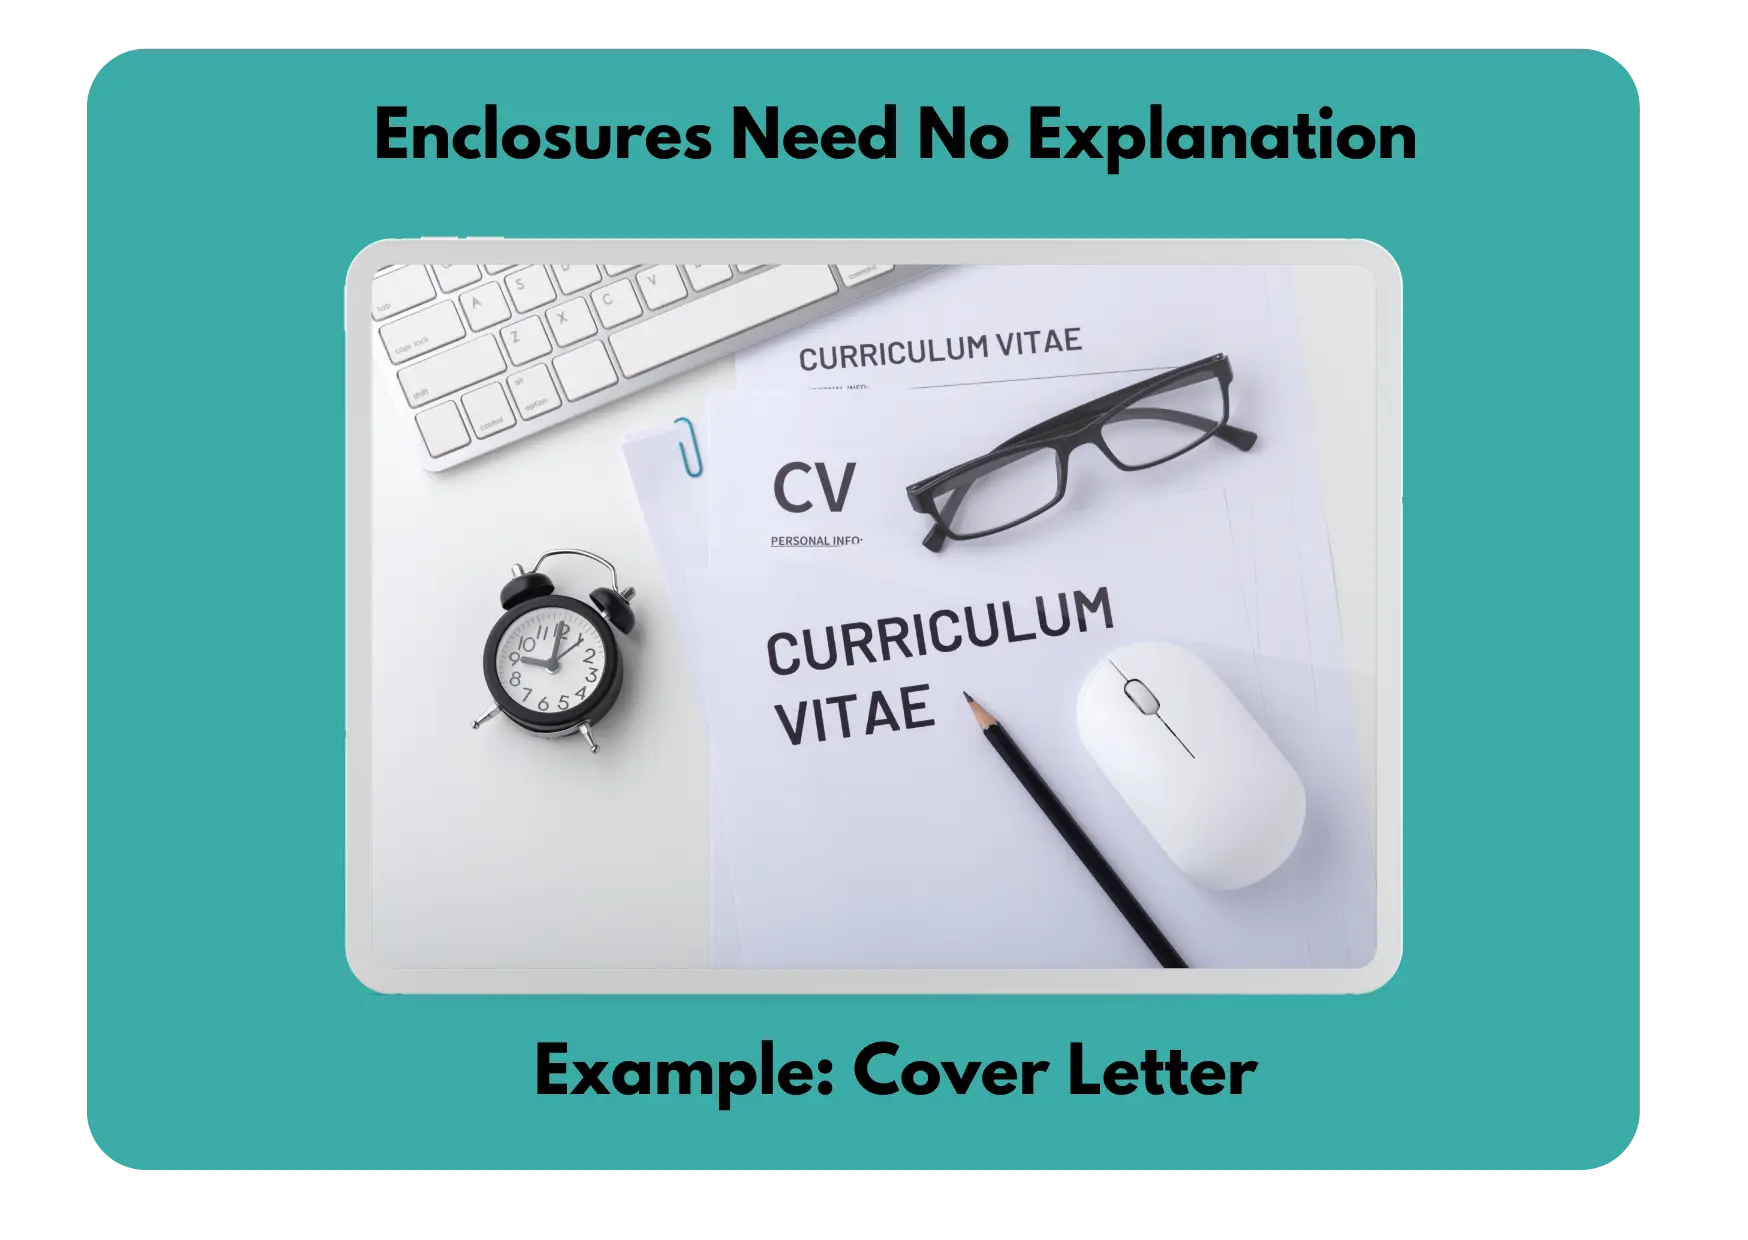 Image of a cover letter which is an example of an enclosure that does not need to be cited within a formal email.